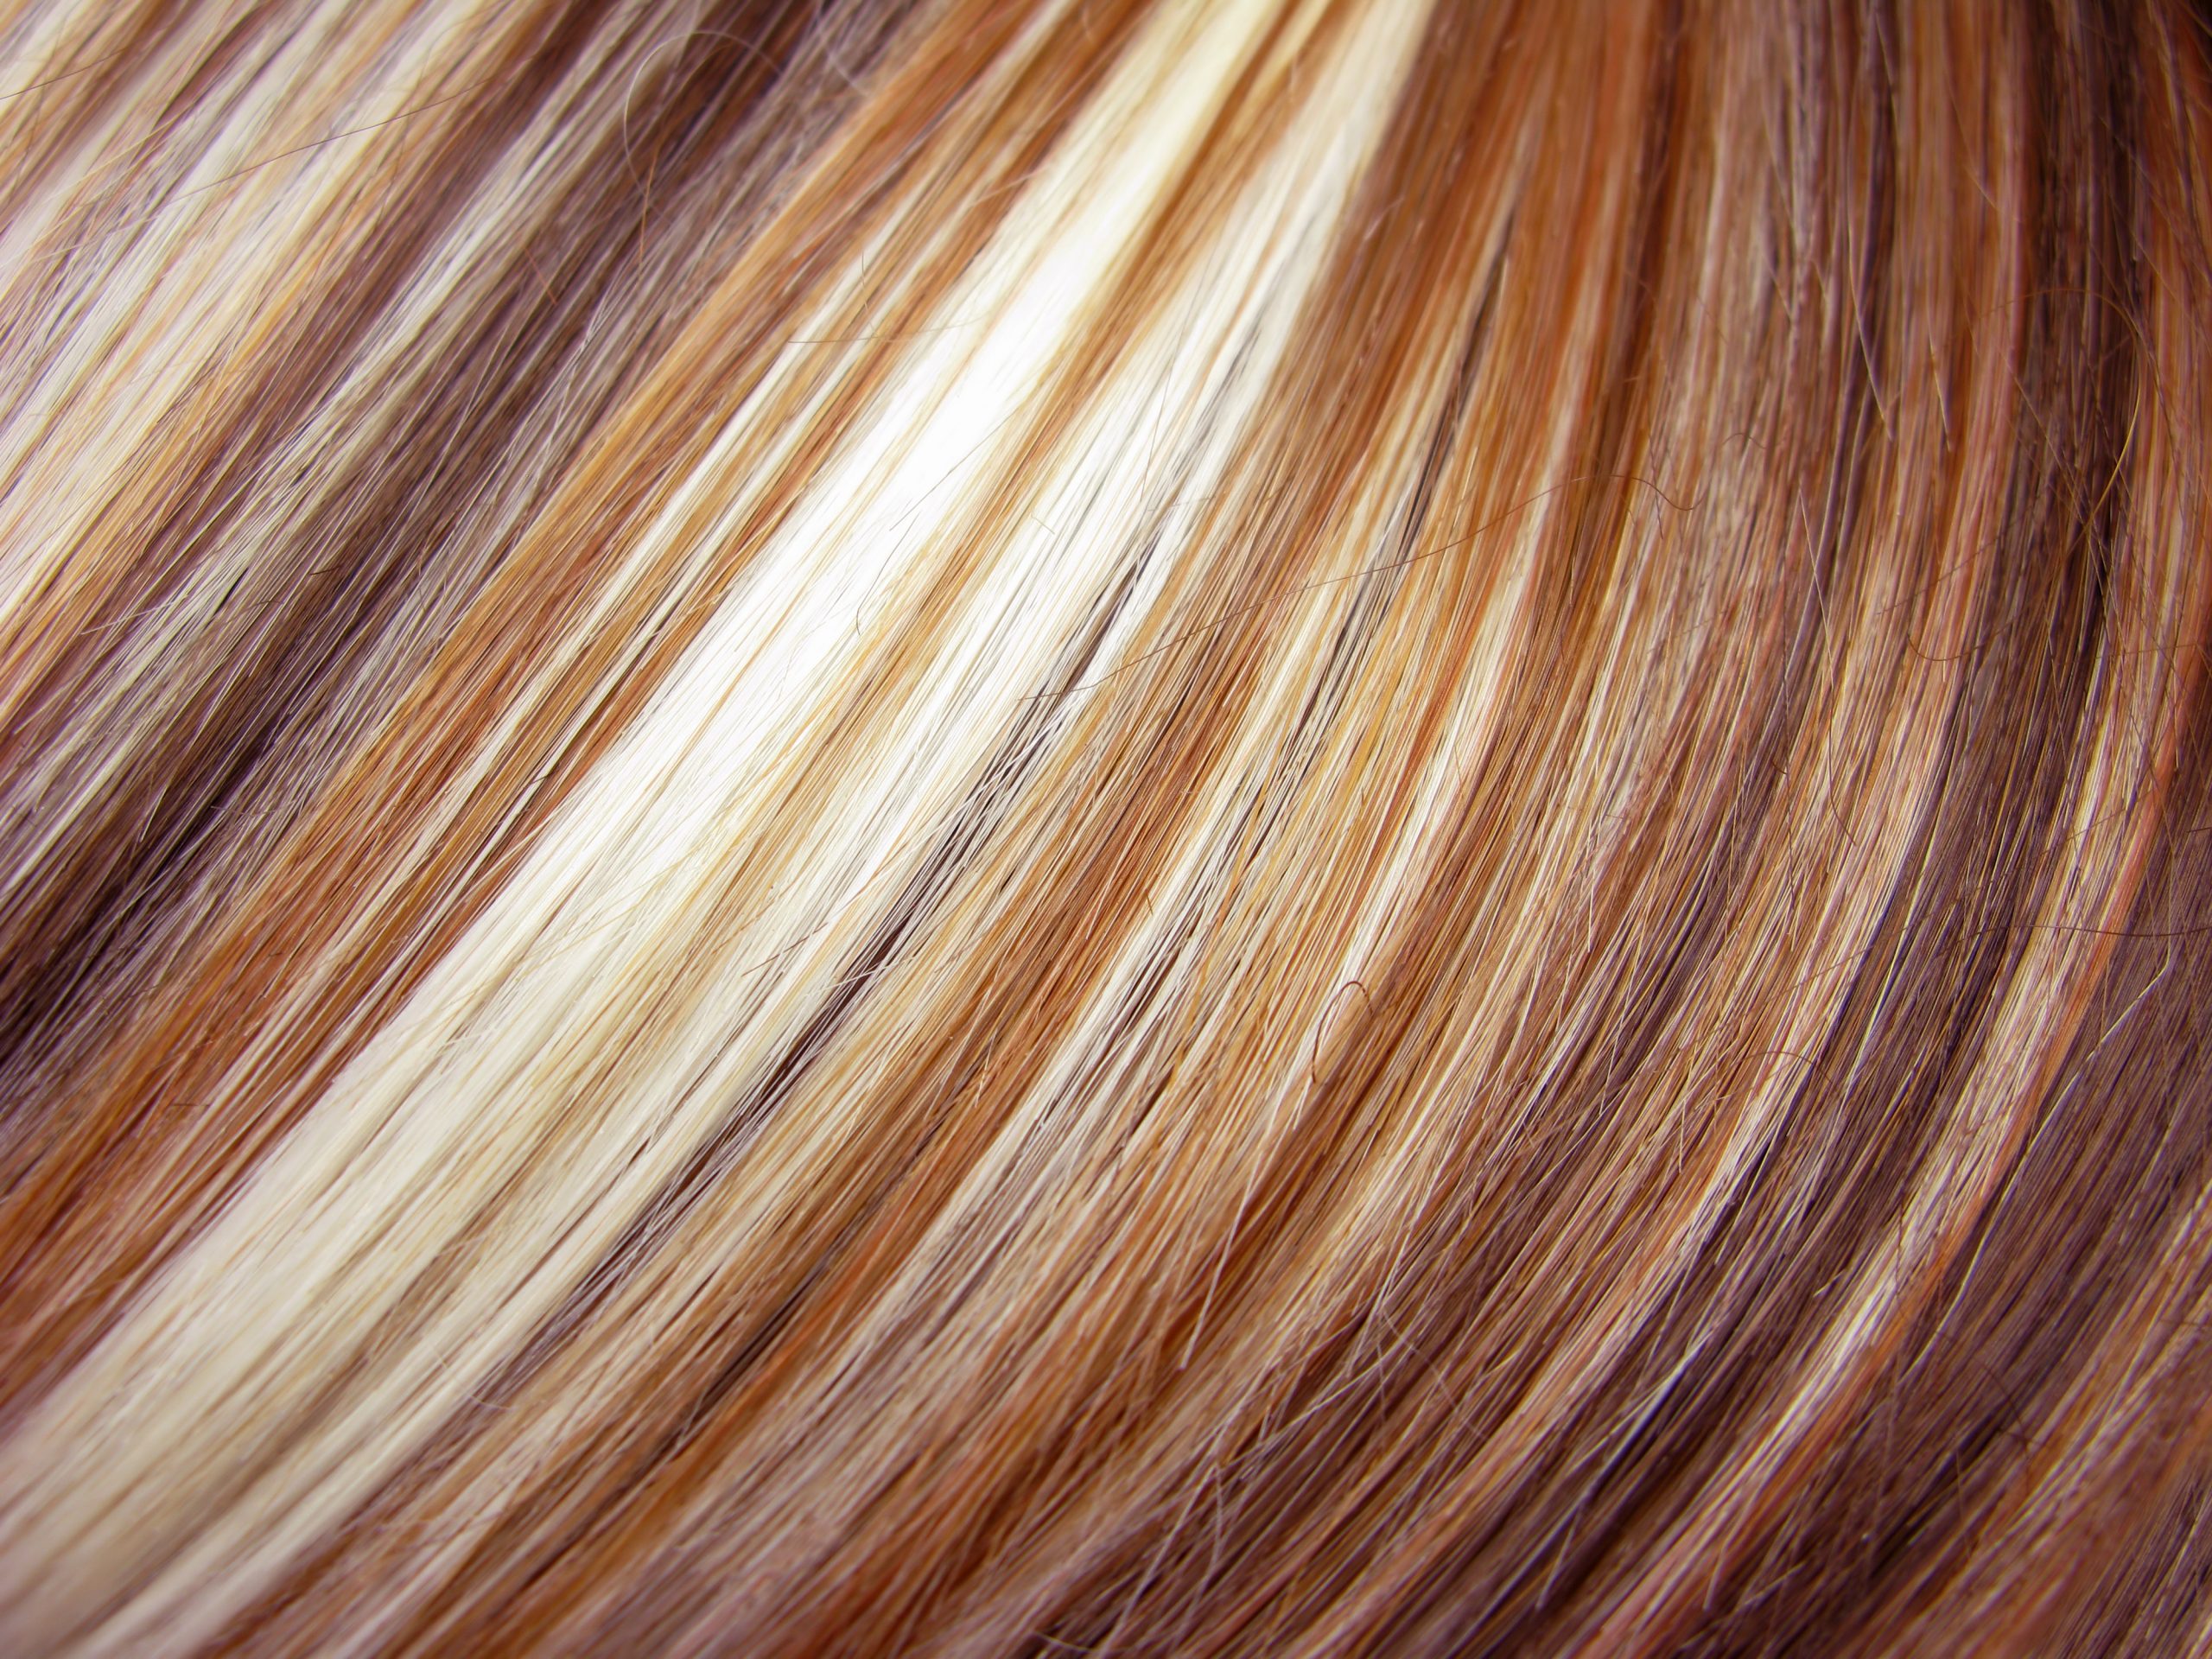 An image of many colors of hair possible at a Gaston hair color salon